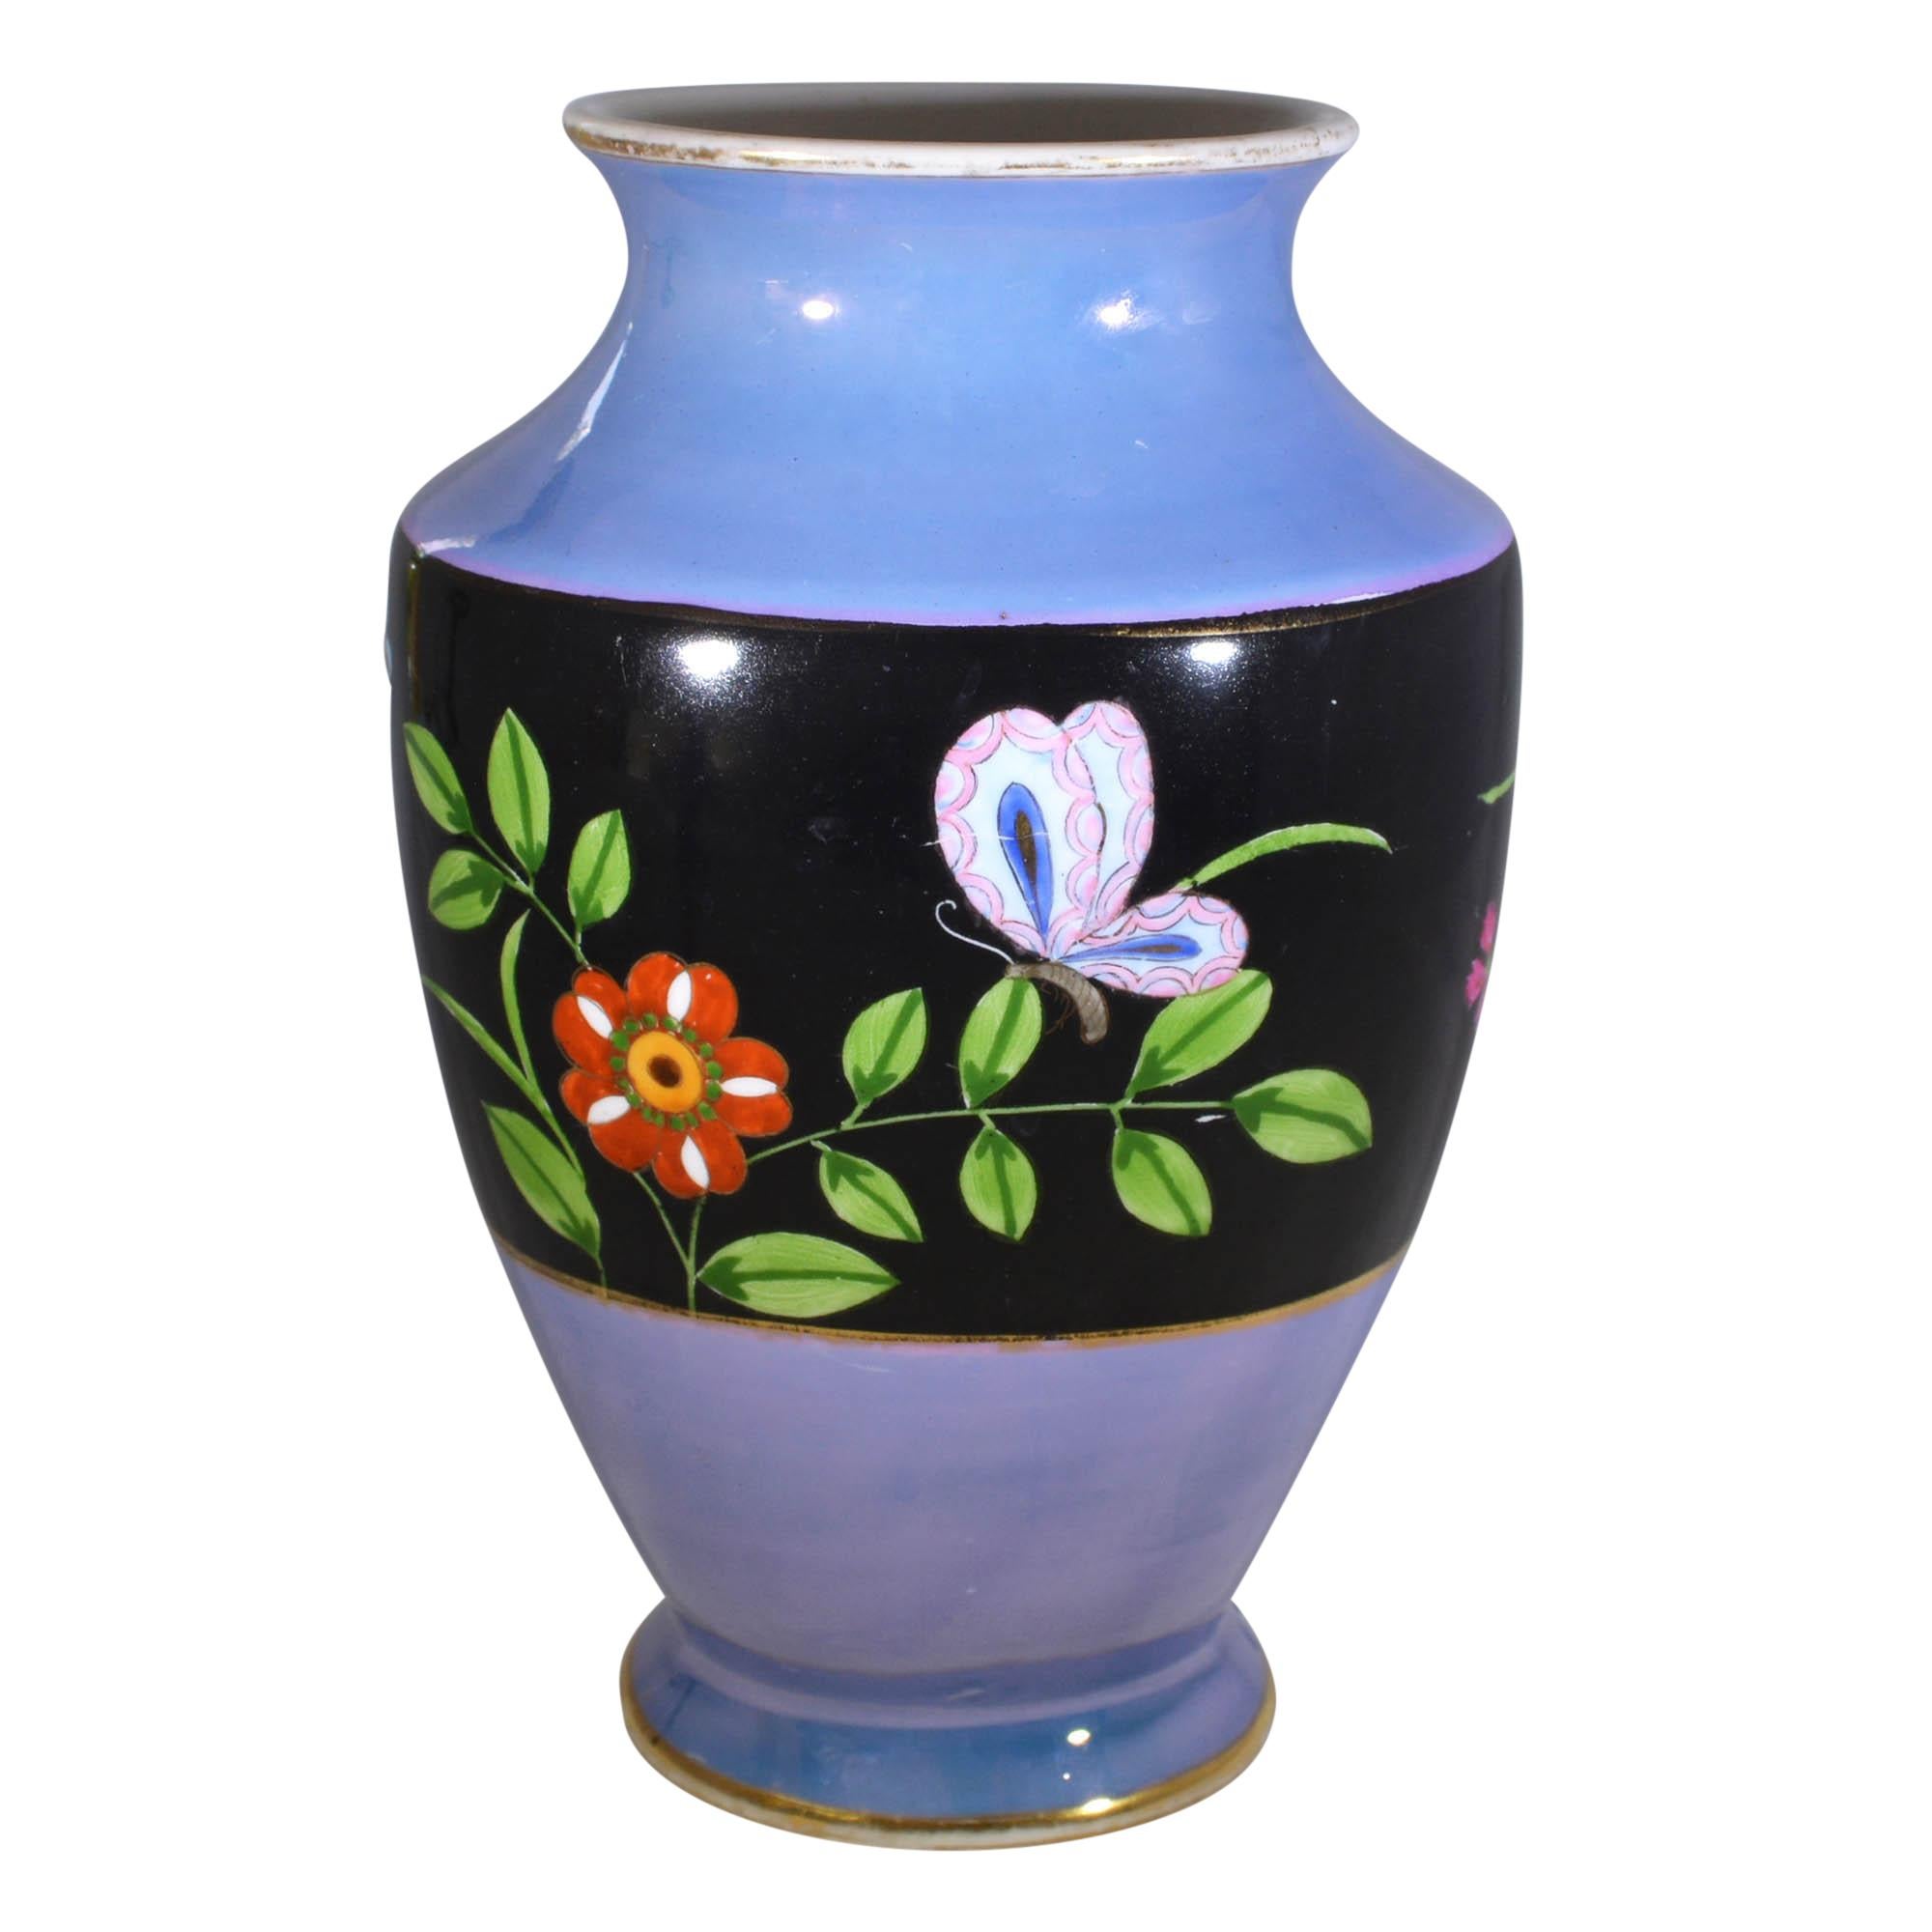 Japanese Noritake Hand Painted Vase with Floral and Butterfly Design